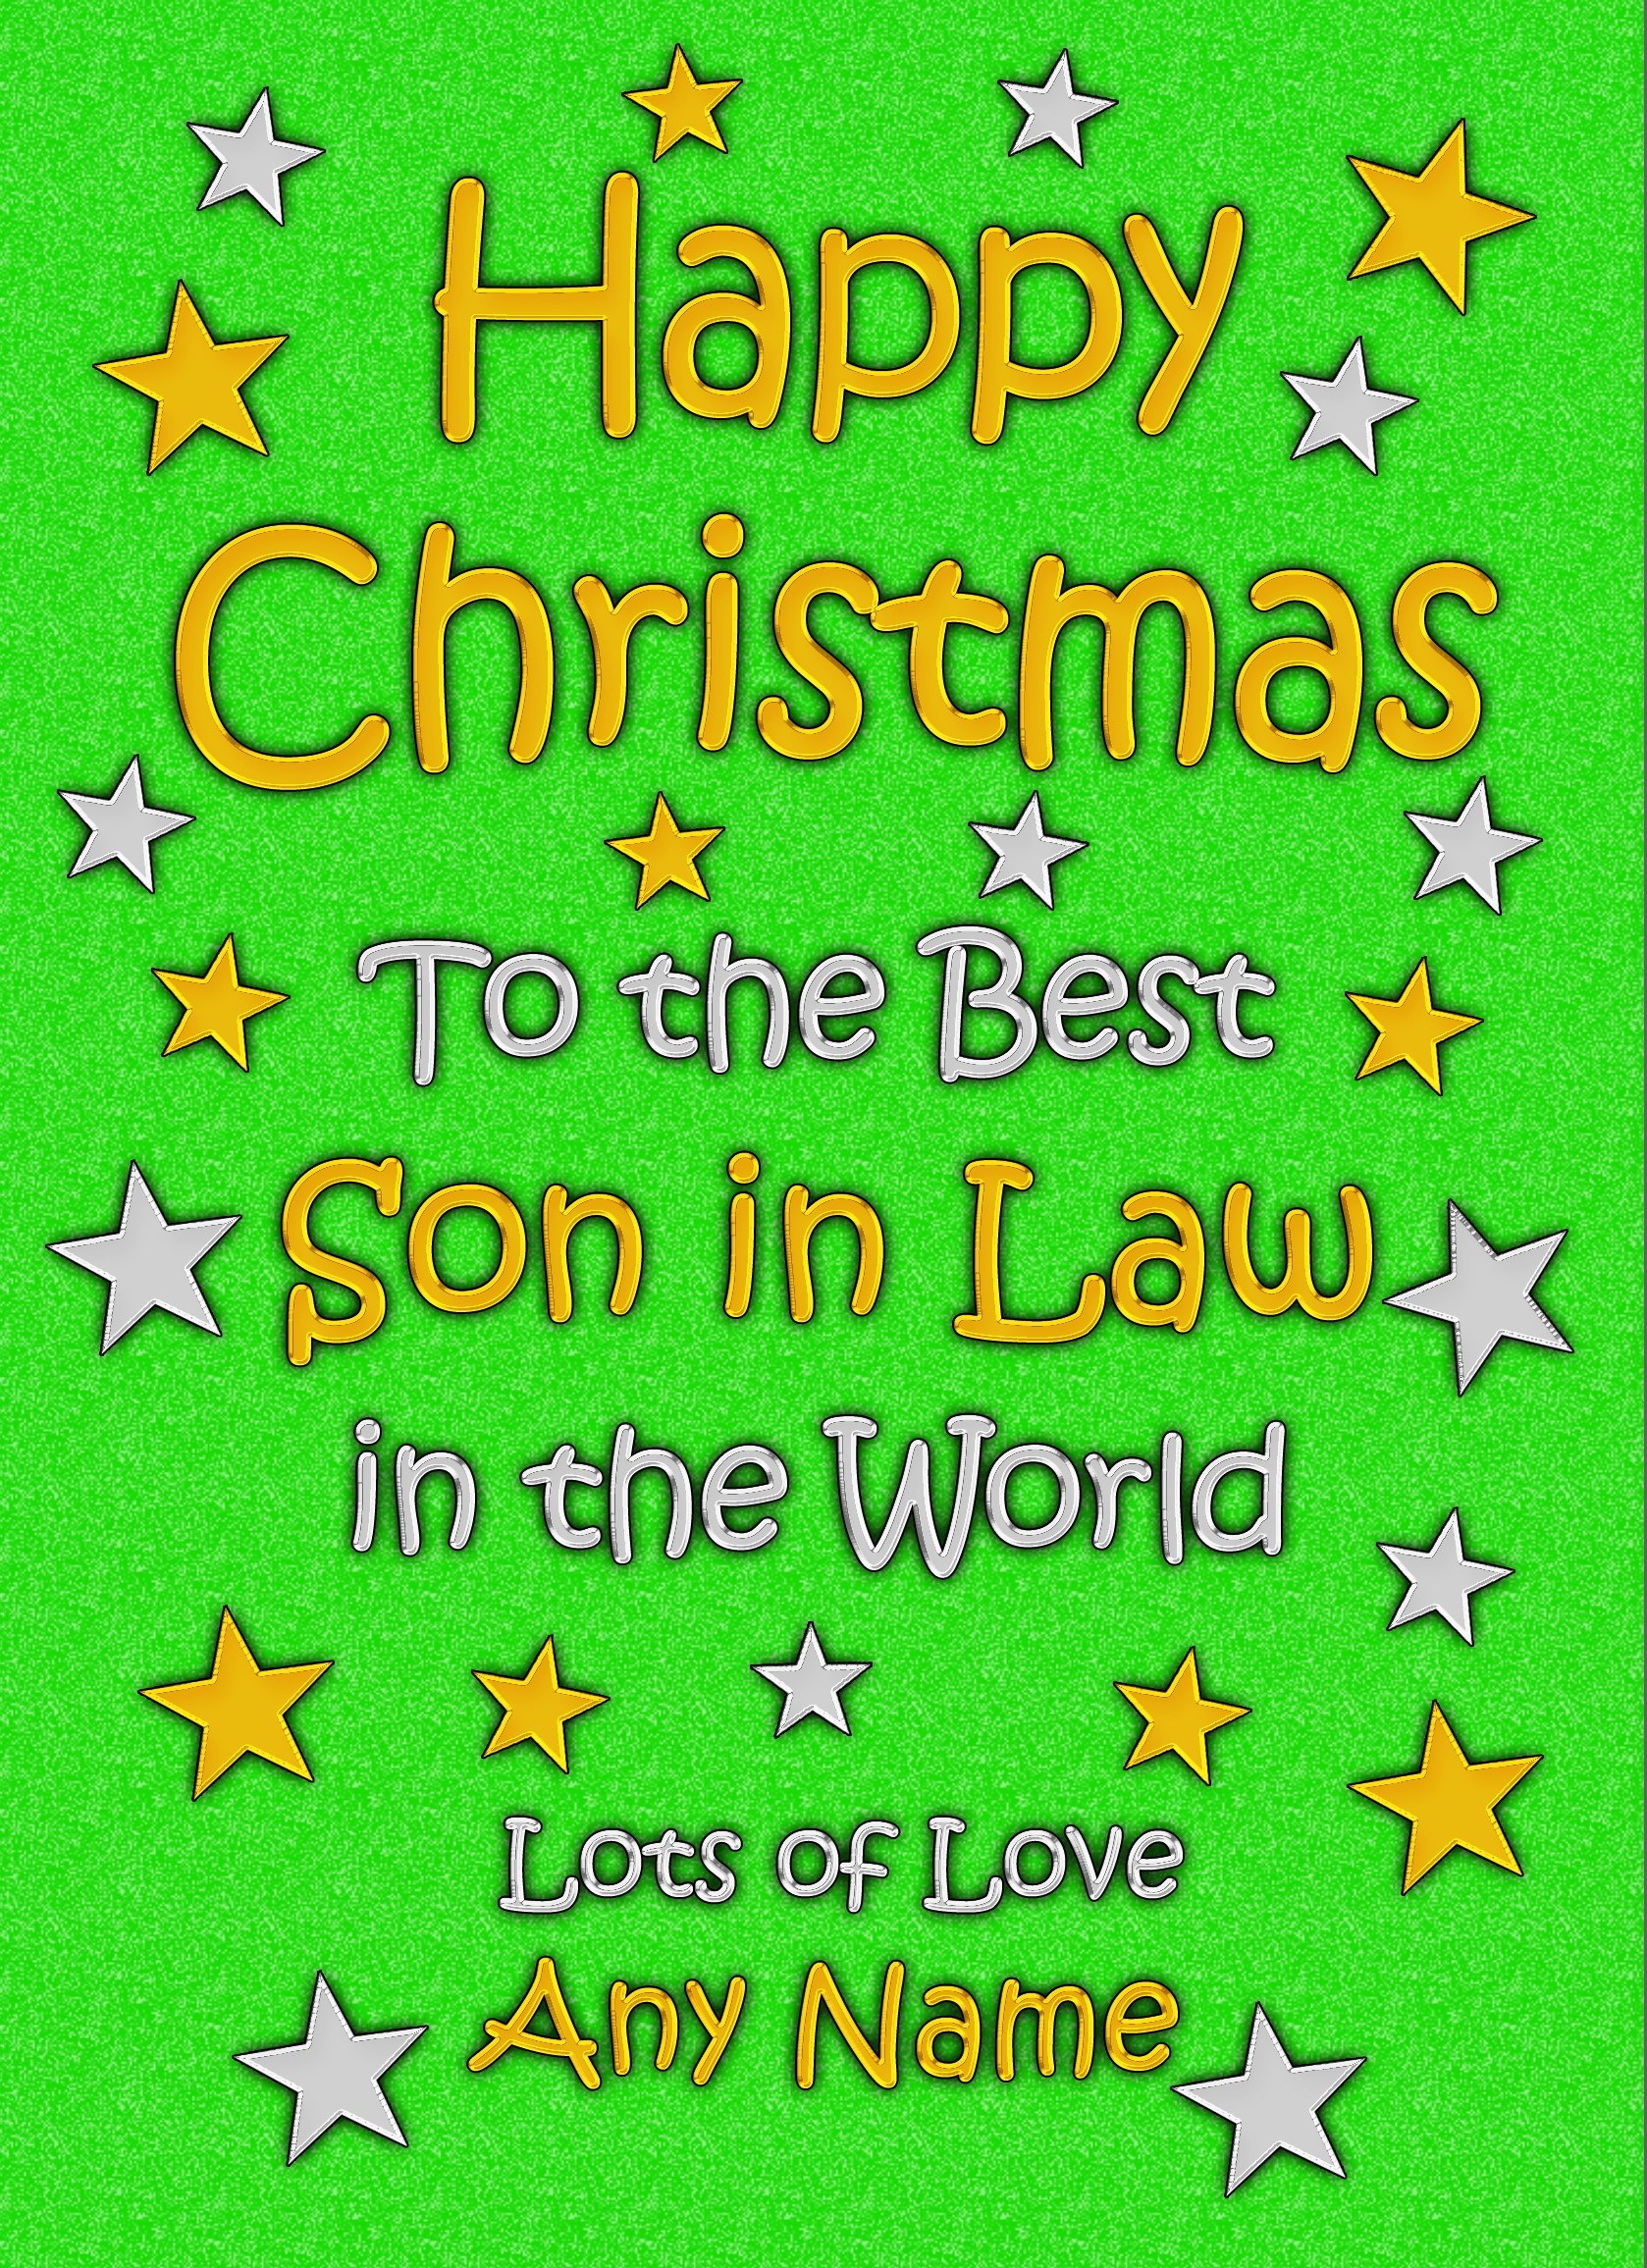 Personalised Son in Law Christmas Card (Green)